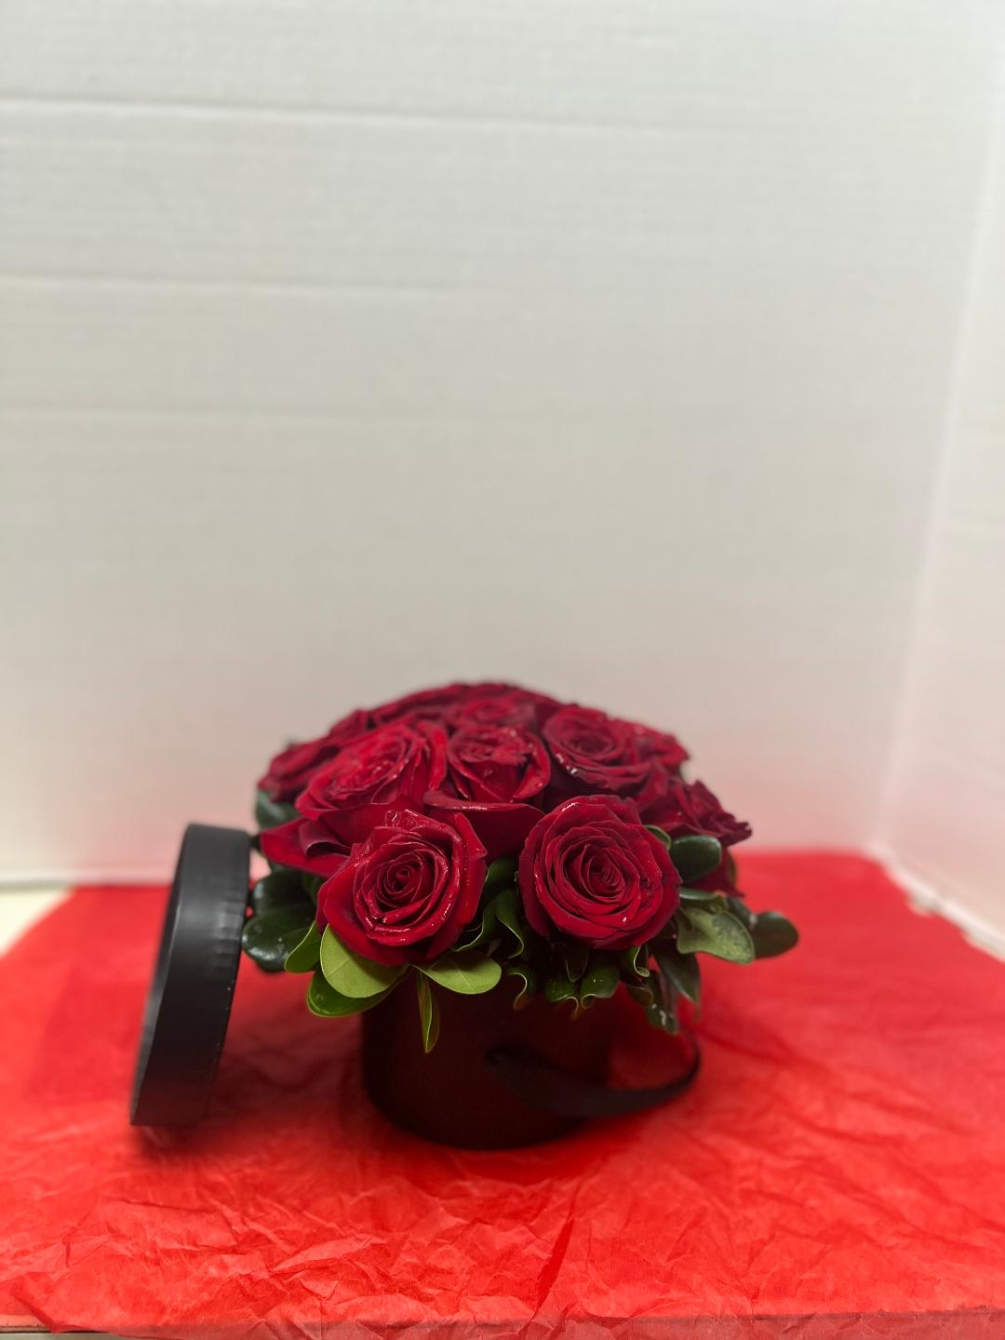 A new popular modern take on the traditional red rose arrangement. Designed